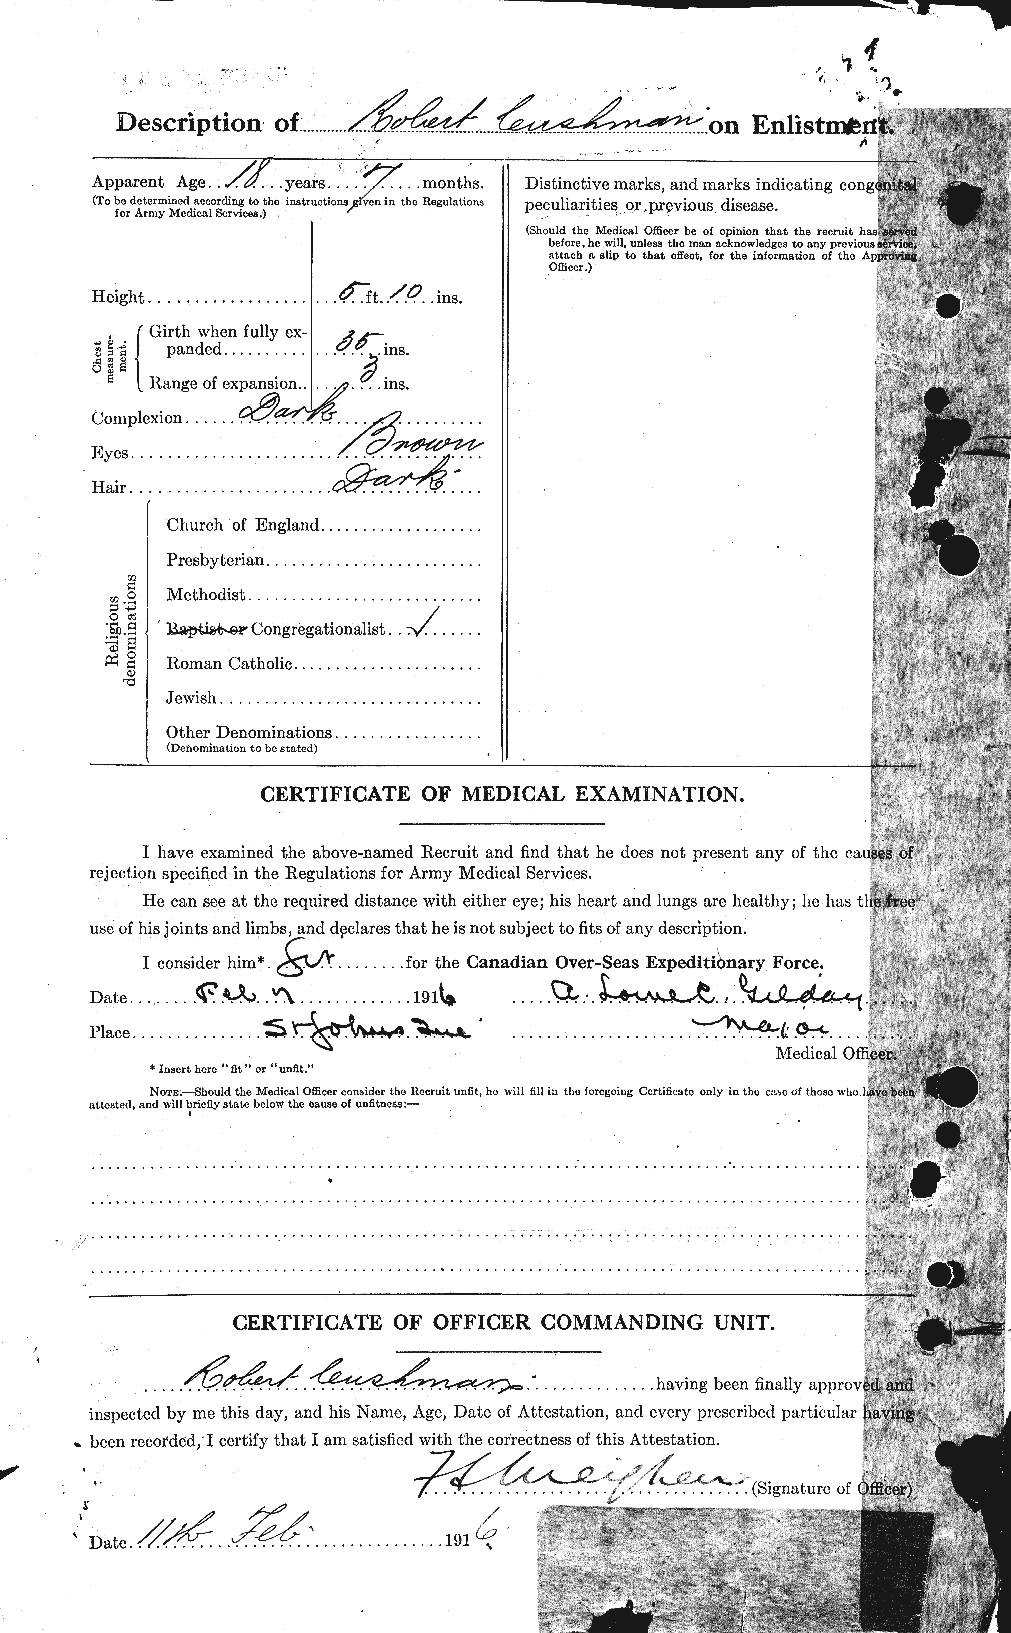 Personnel Records of the First World War - CEF 074289b